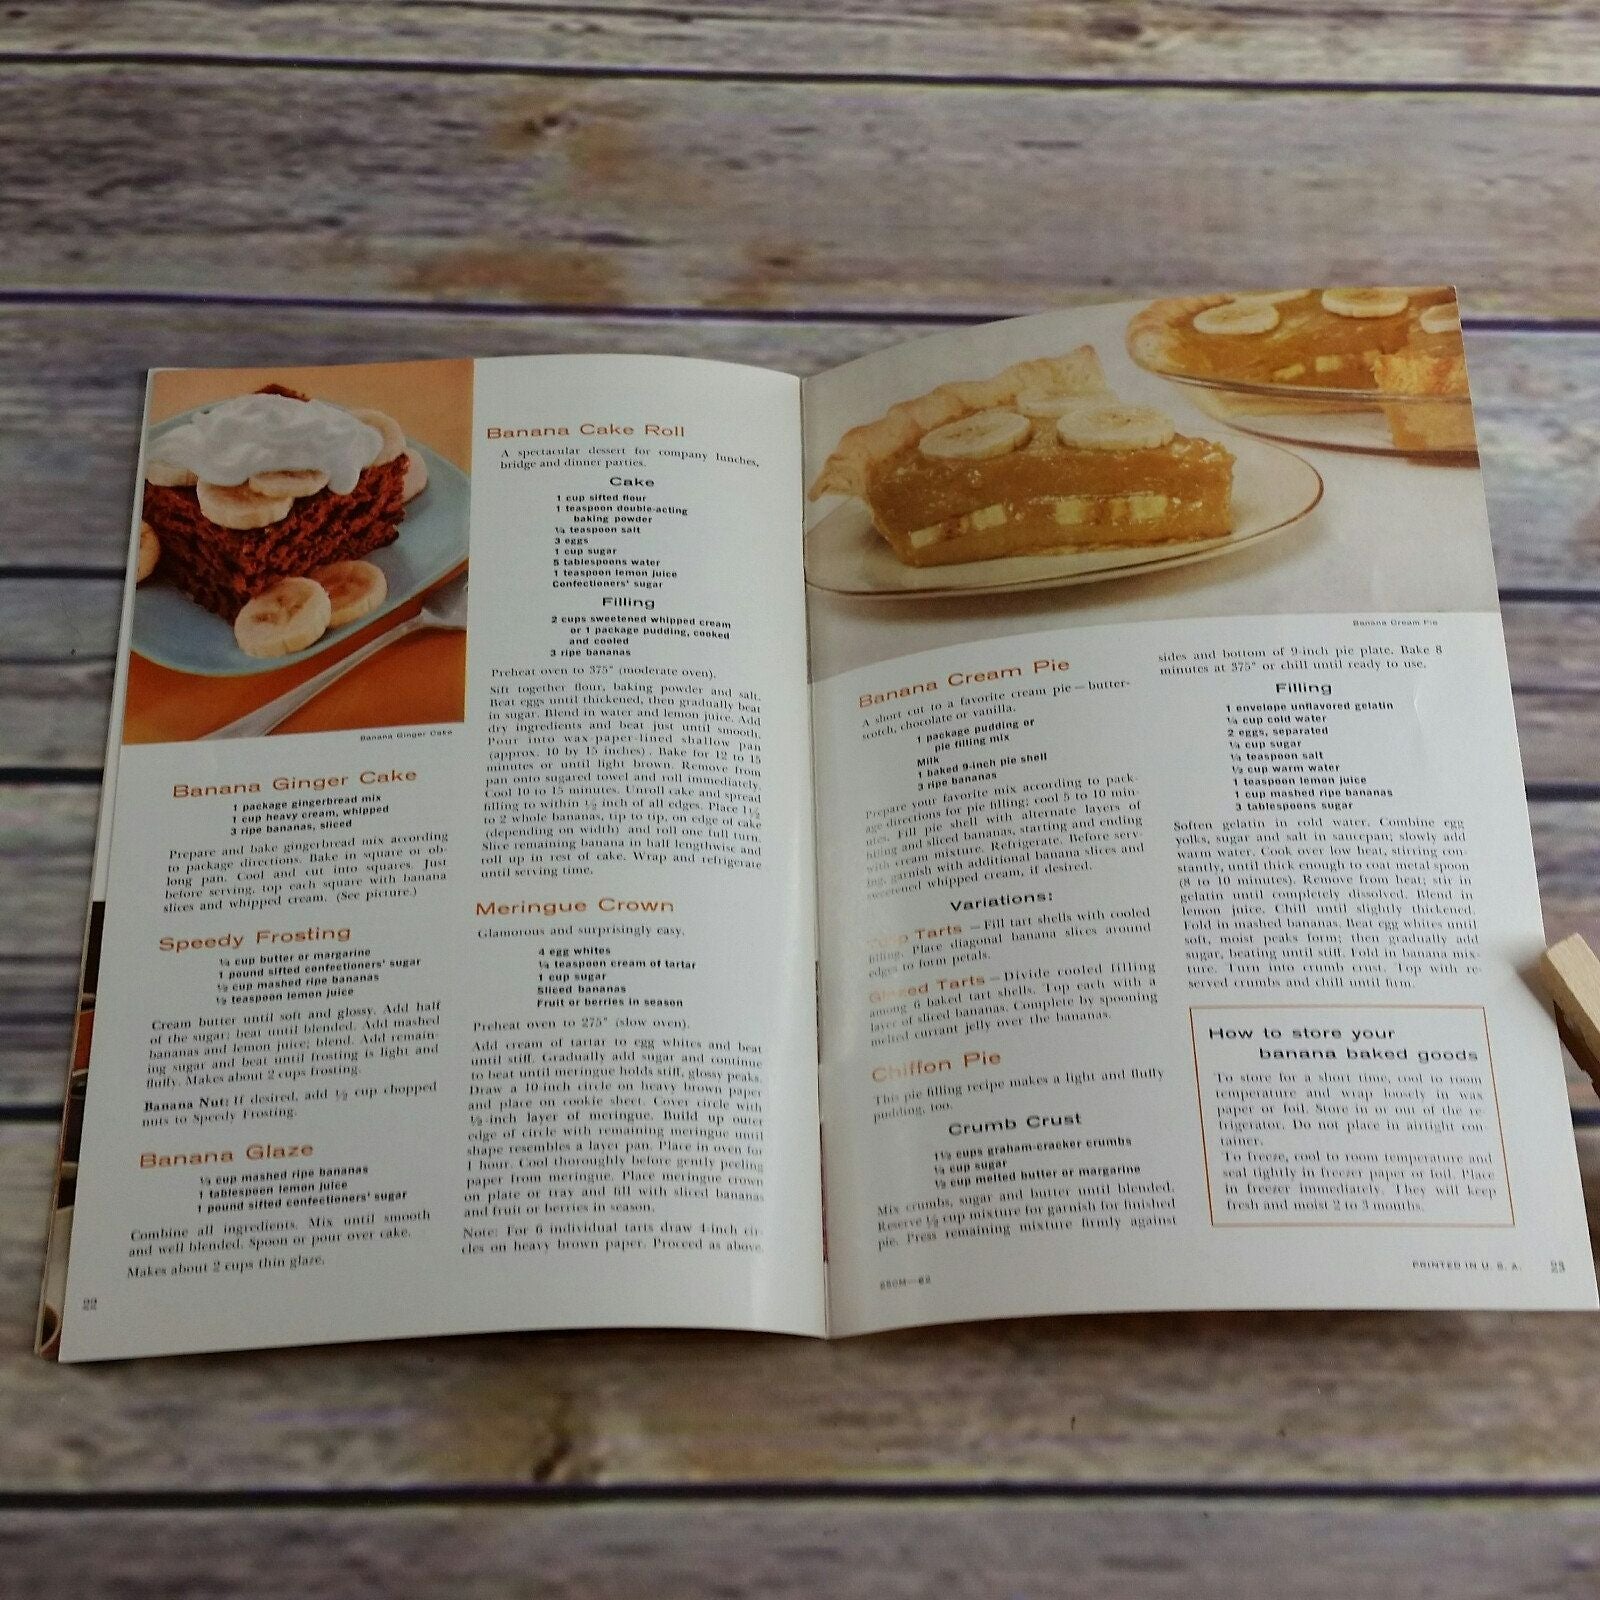 Vintage Cookbook Chiquita Banana Promo Recipes United Fruit Company 1960s Booklet Pamphlet Desserts Salads Main Dishes Banana Breads - At Grandma's Table